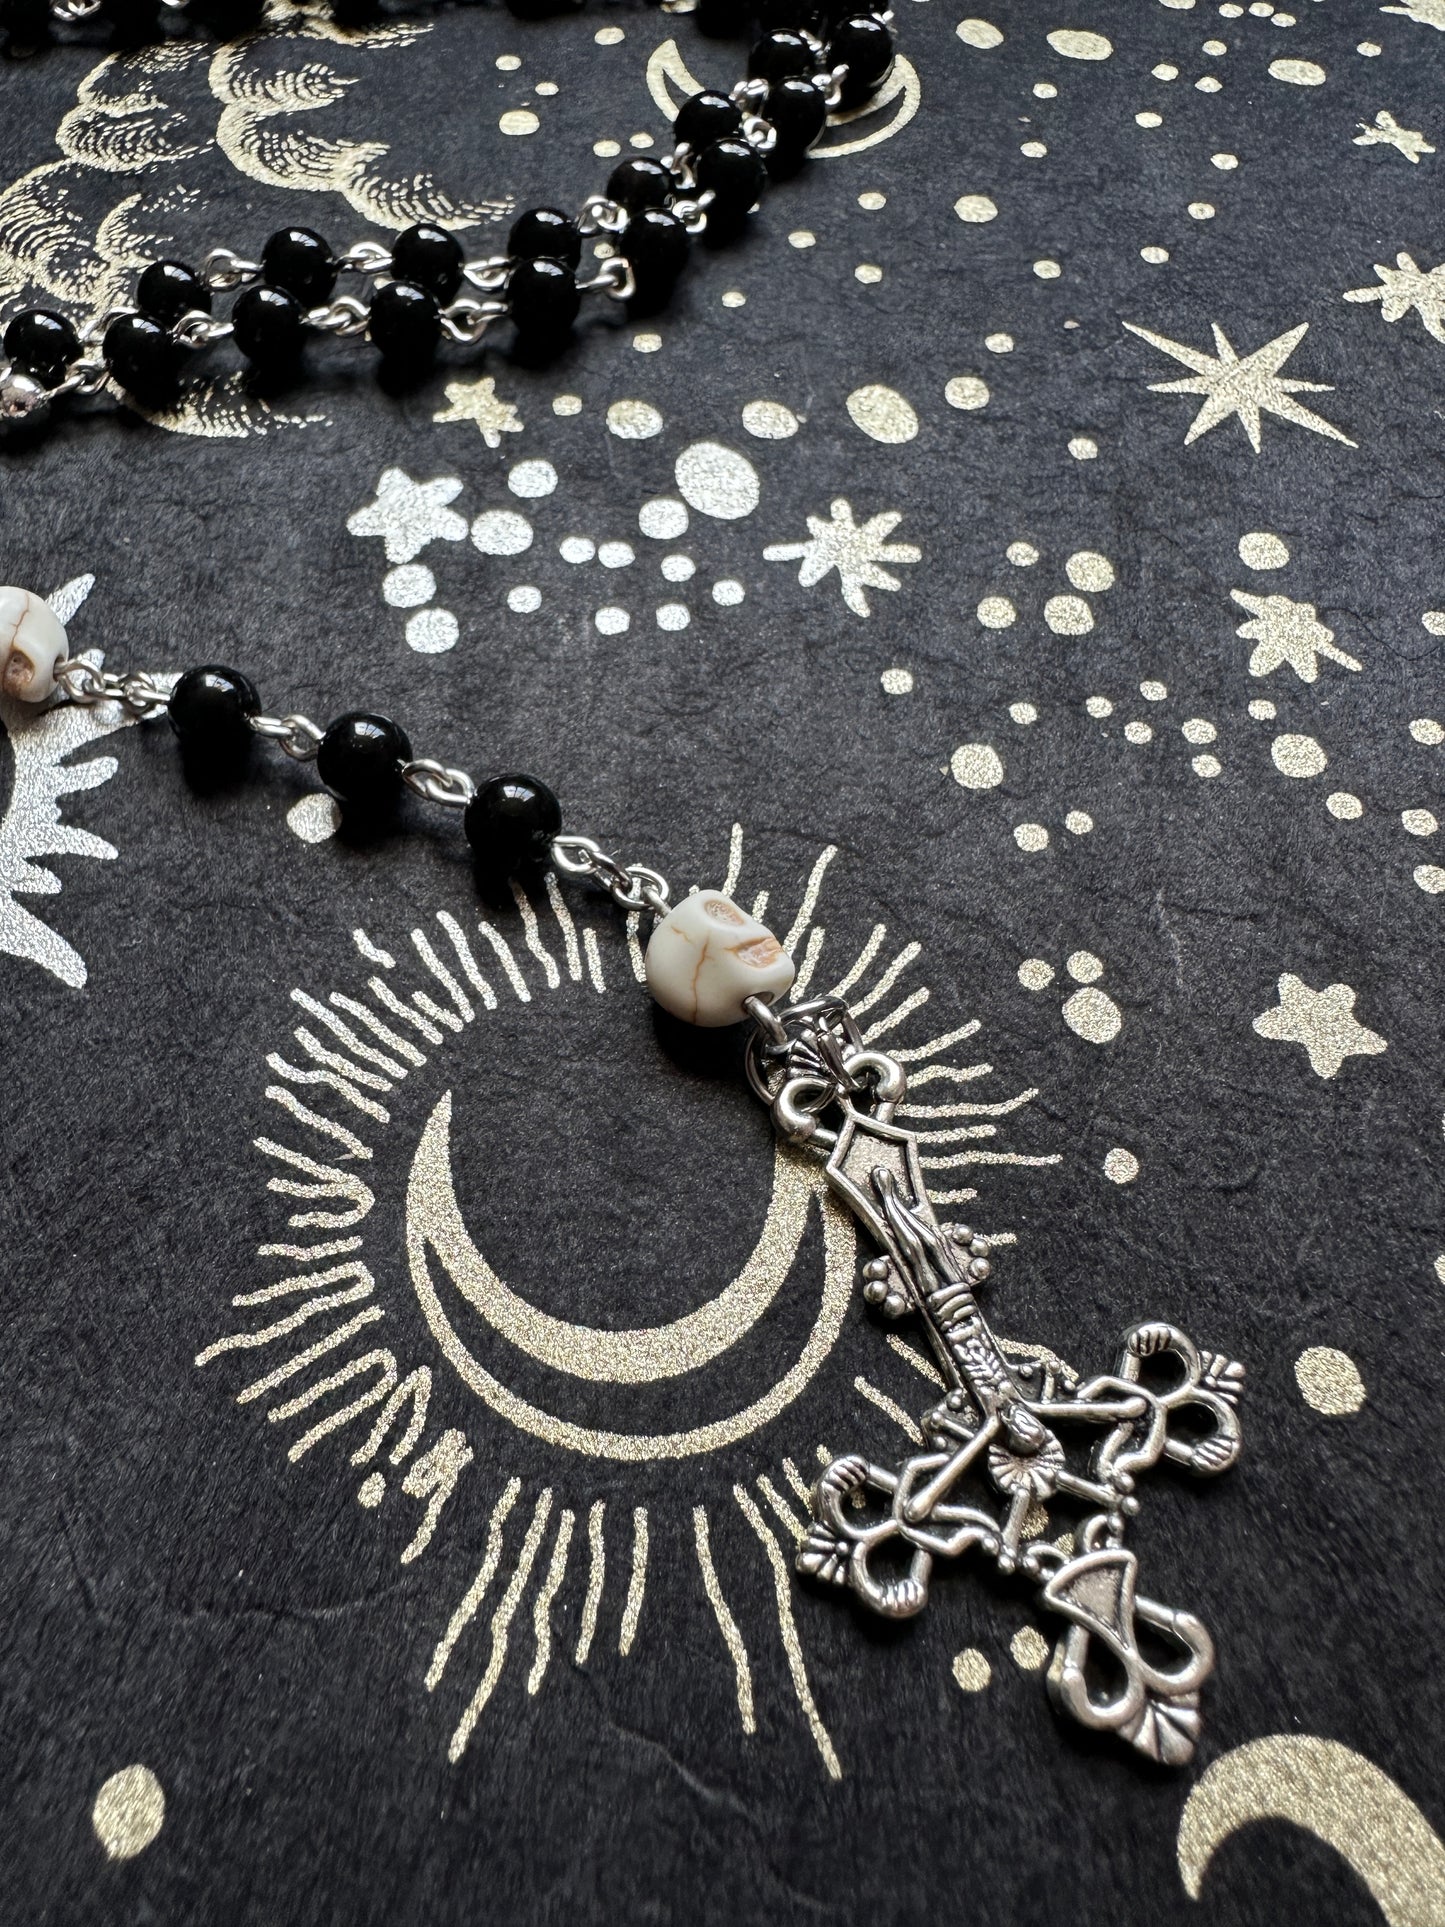 Black rosary with skull beads